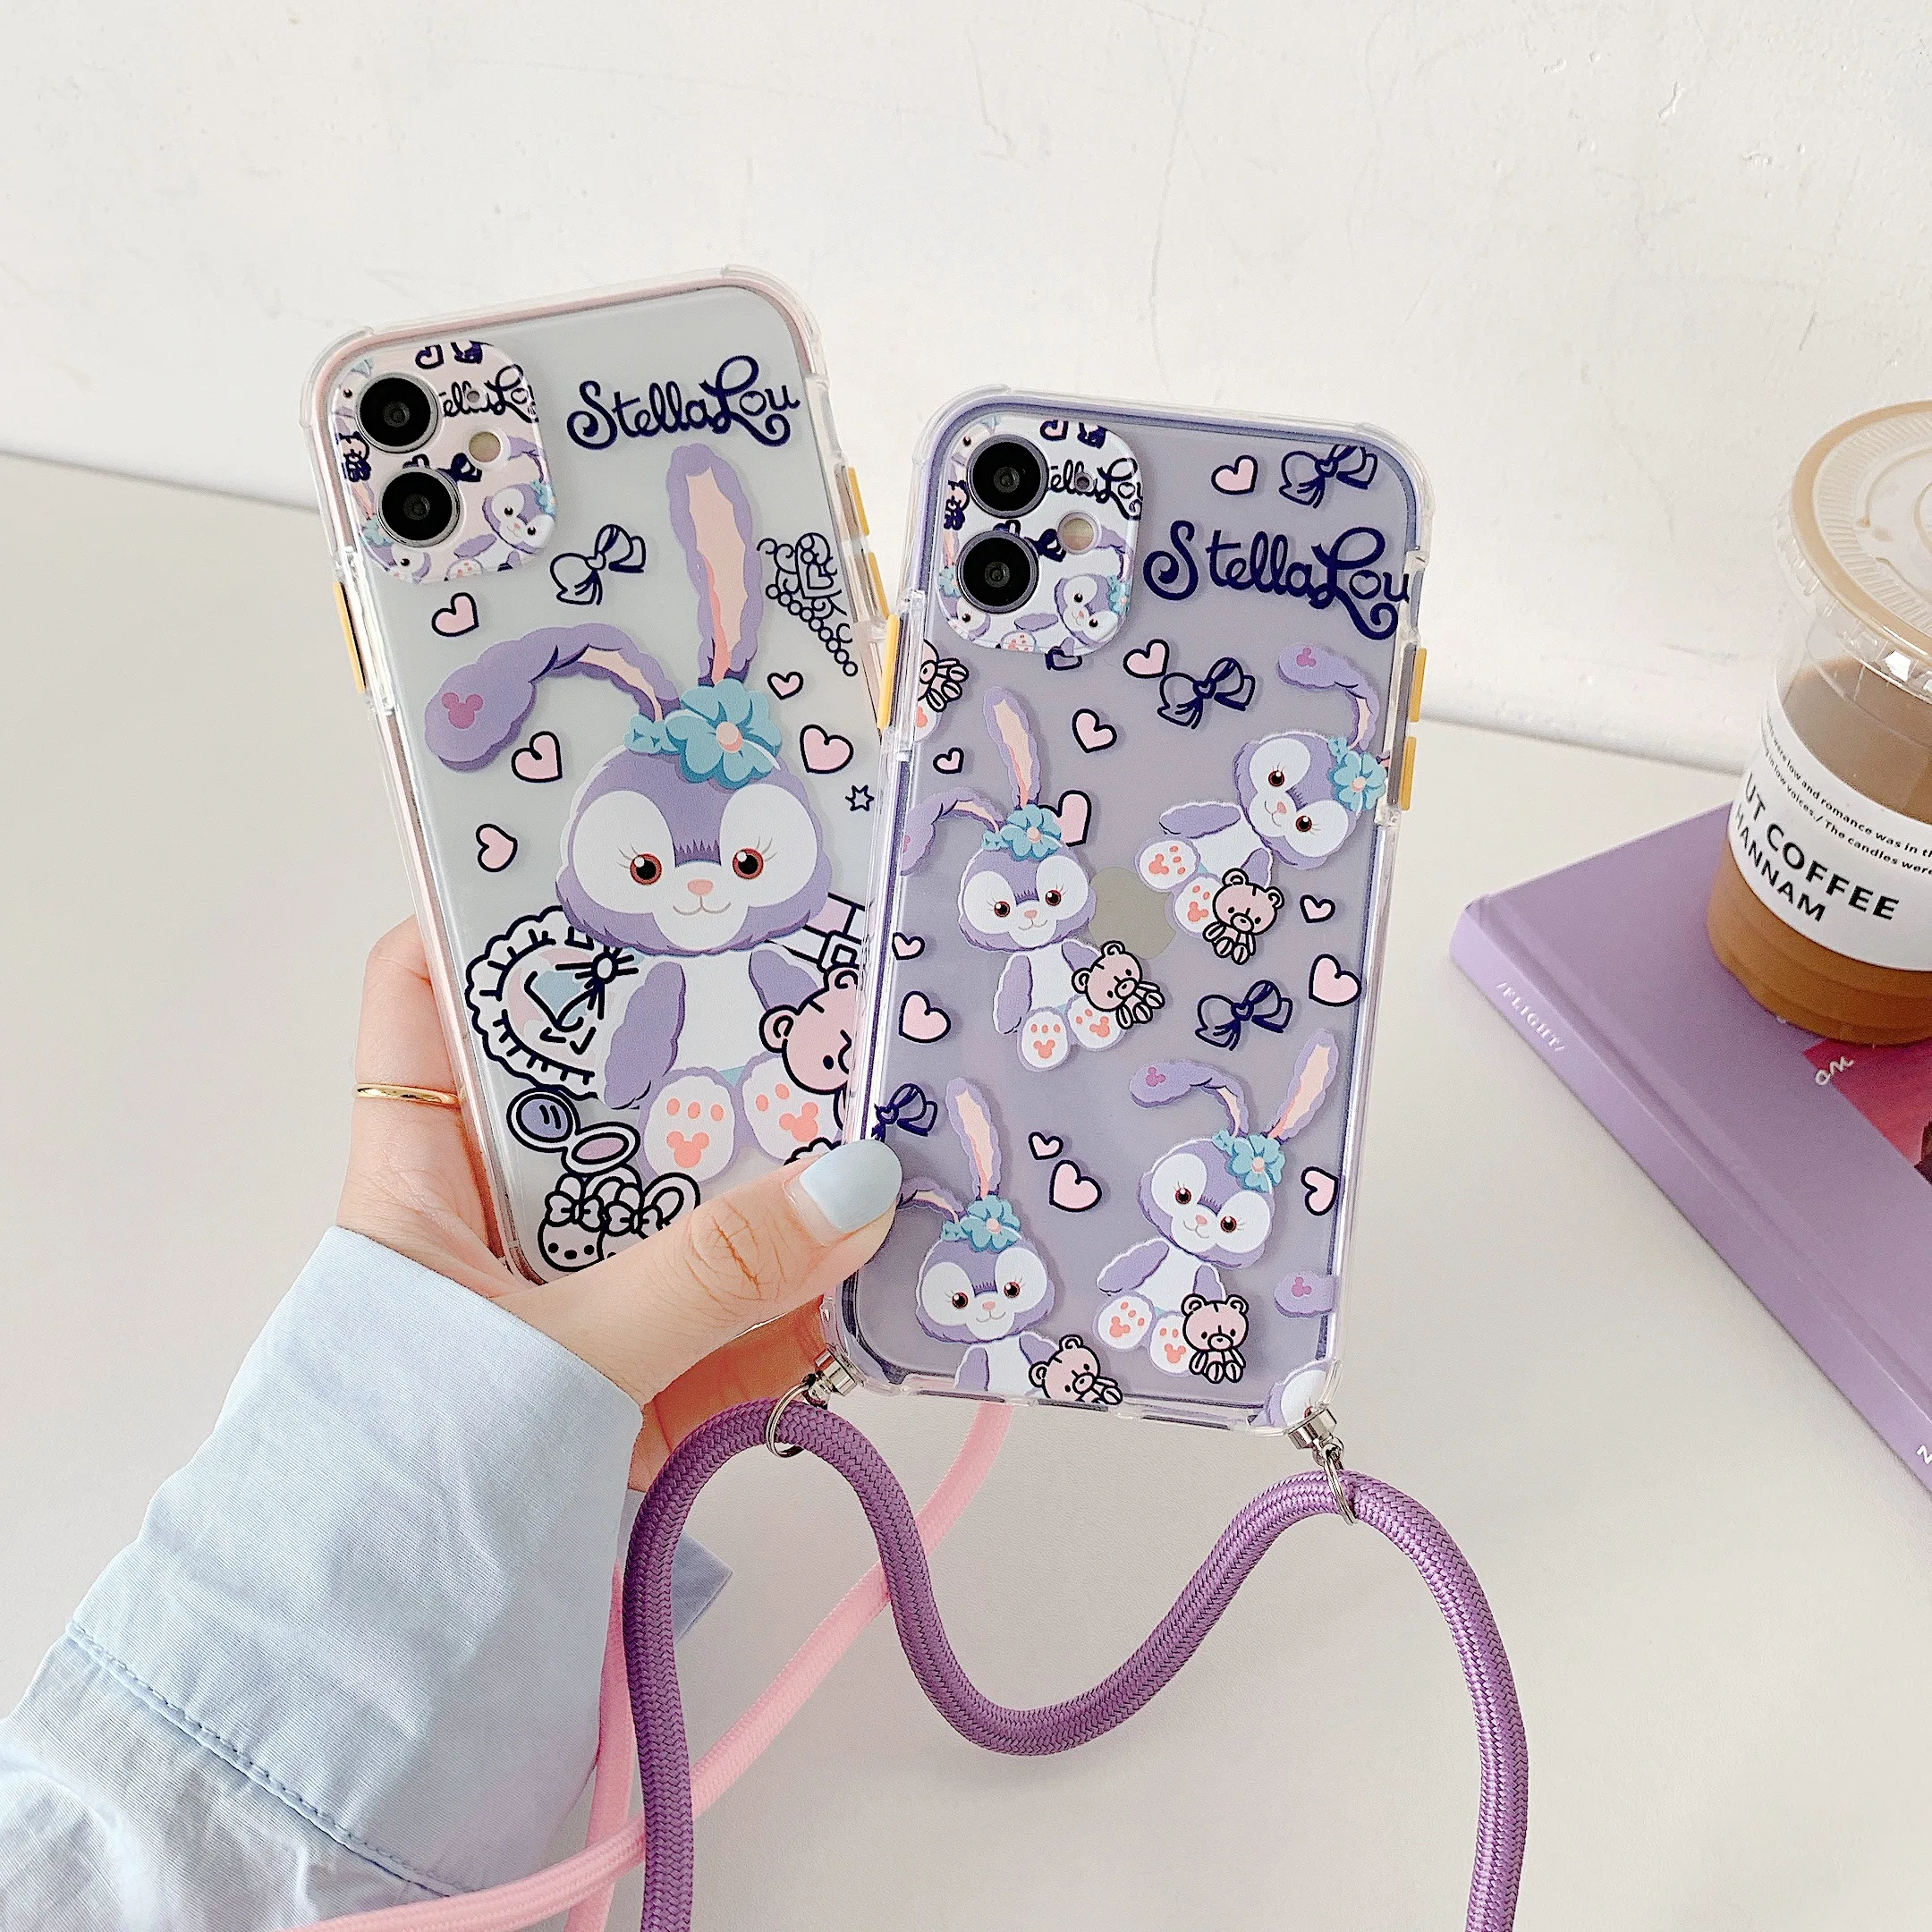 

Bunny lanyard shell is suitable for iPhone7 8 iPhone7P 8P iPhoneX iPhoneXR iPhone XS MAX iPhone 11 iPhone 11 por iPhone11por max